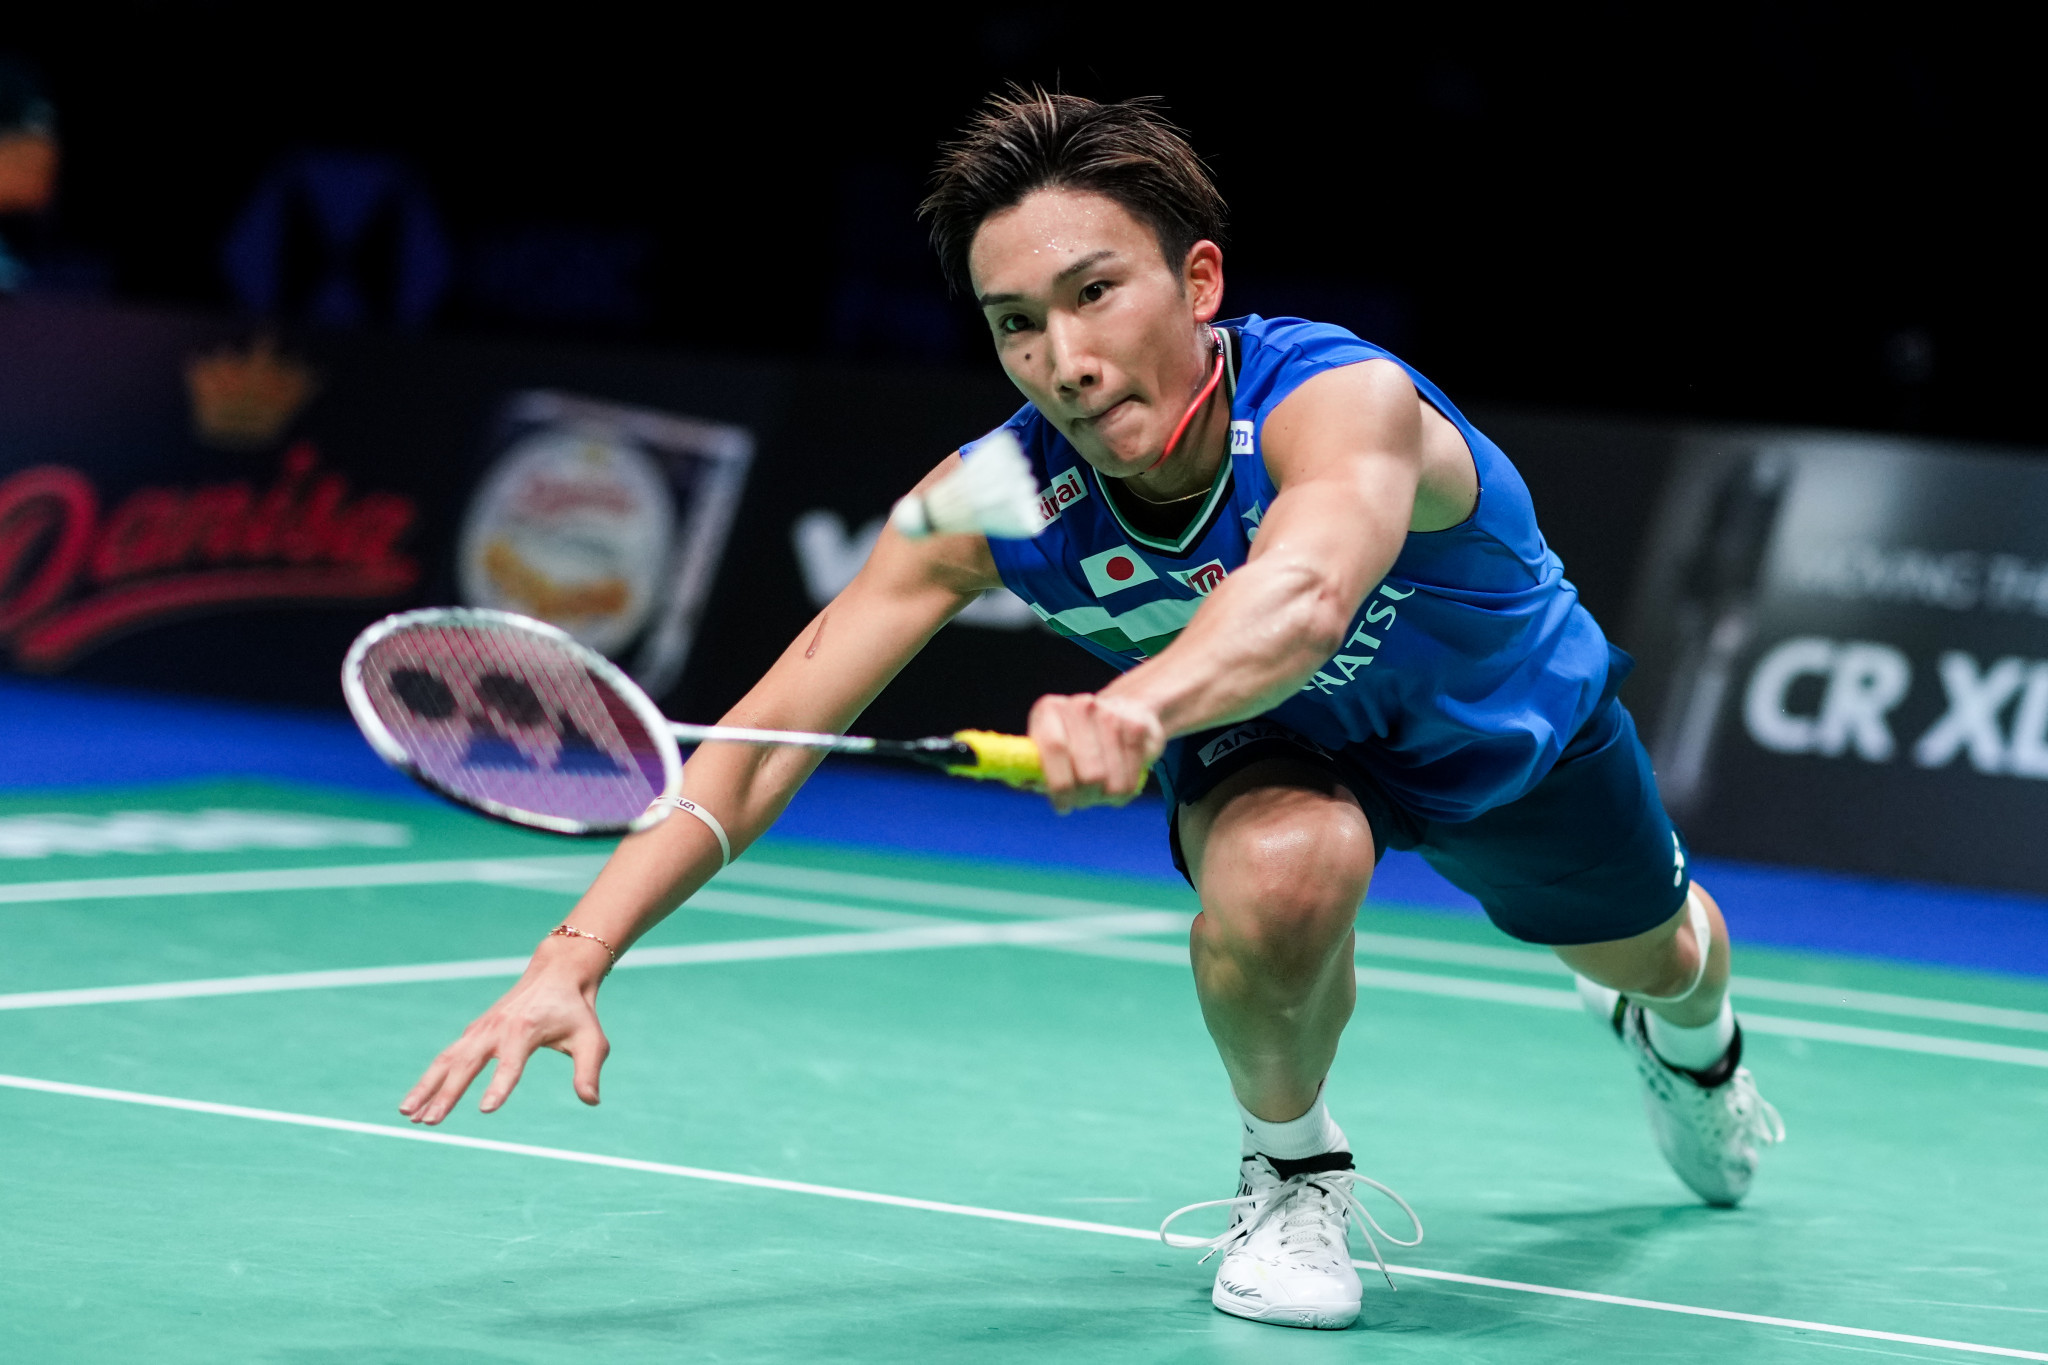 Kento Momota is one of only three seeds remaining in the men's singles draw ©Getty Images